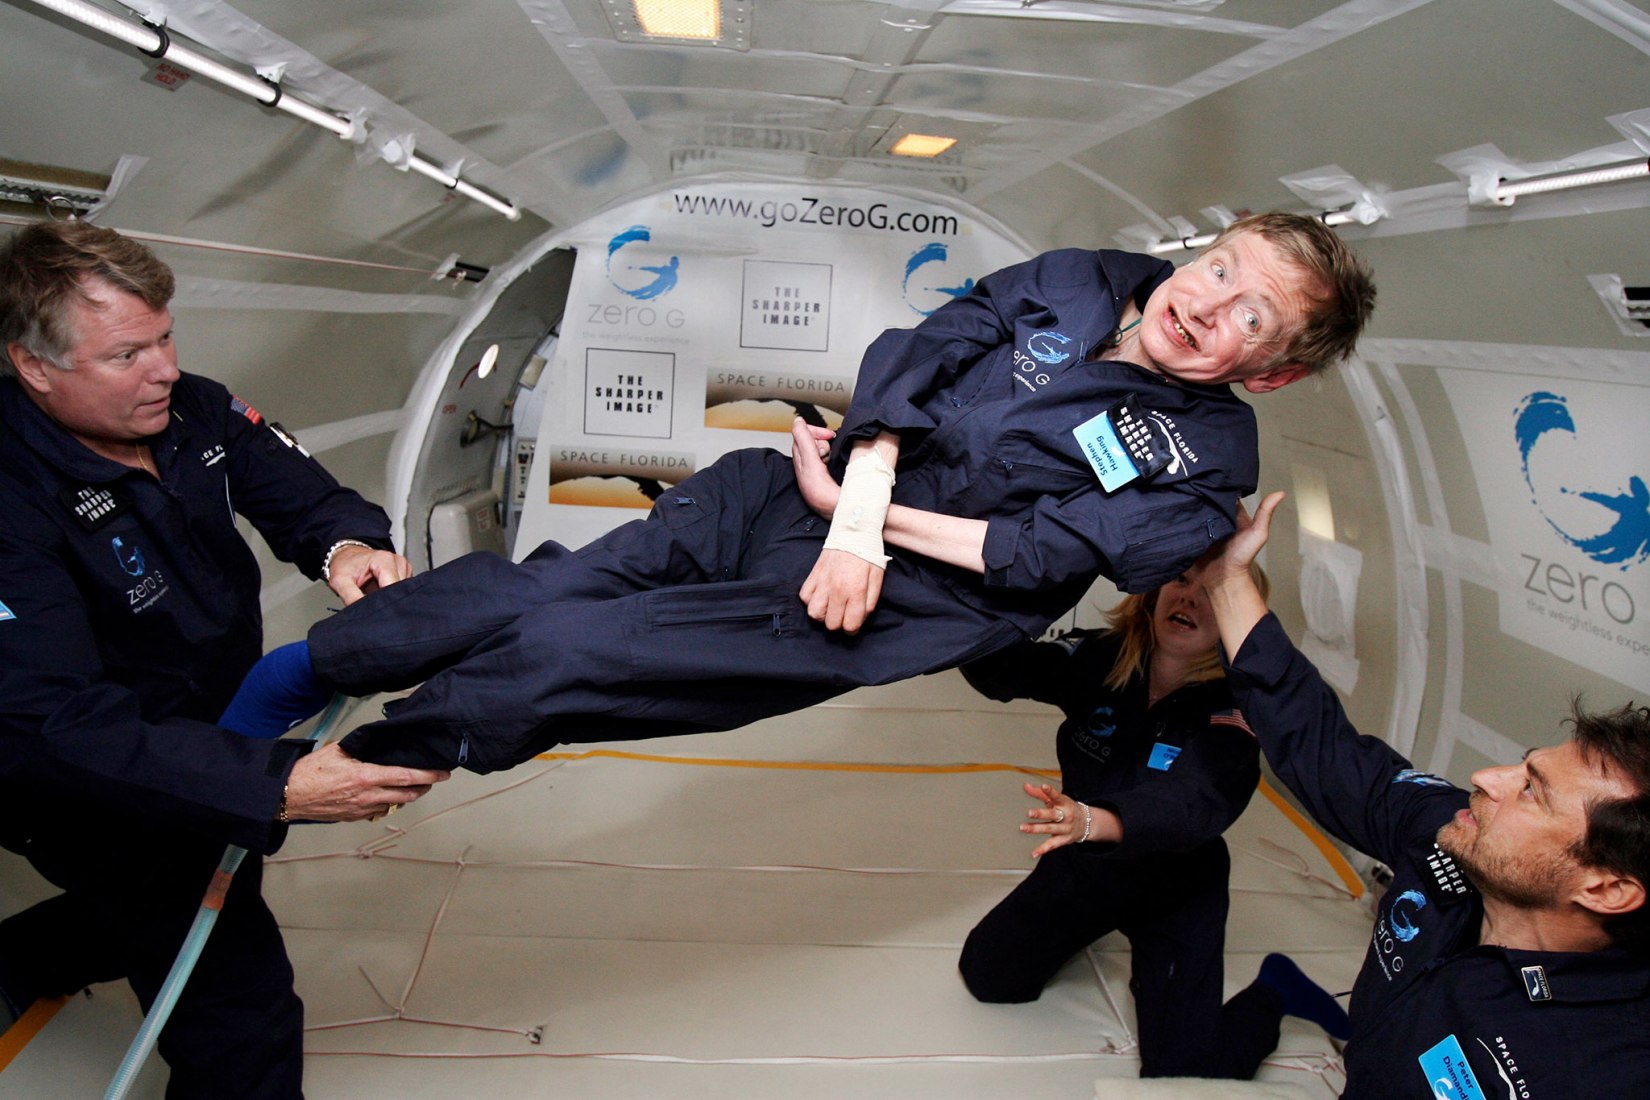 Stephen Hawking (center) enjoys zero gravity during a flight aboard a modified Boeing 727 aircraft owned by Zero Gravity Corp. (Zero G). Hawking is being rotated in air by (right) Peter Diamandis and (left) Byron Lichtenberg, former shuttle payload specialist. Kneeling below Hawking is Nicola O'Brien, is Hawking's aide. At his 65th birthday on January 8, 2007, Hawking announced his plans for a zero-gravity flight to prepare for a sub-orbital space flight in 2009 on Virgin Galactic's space service.